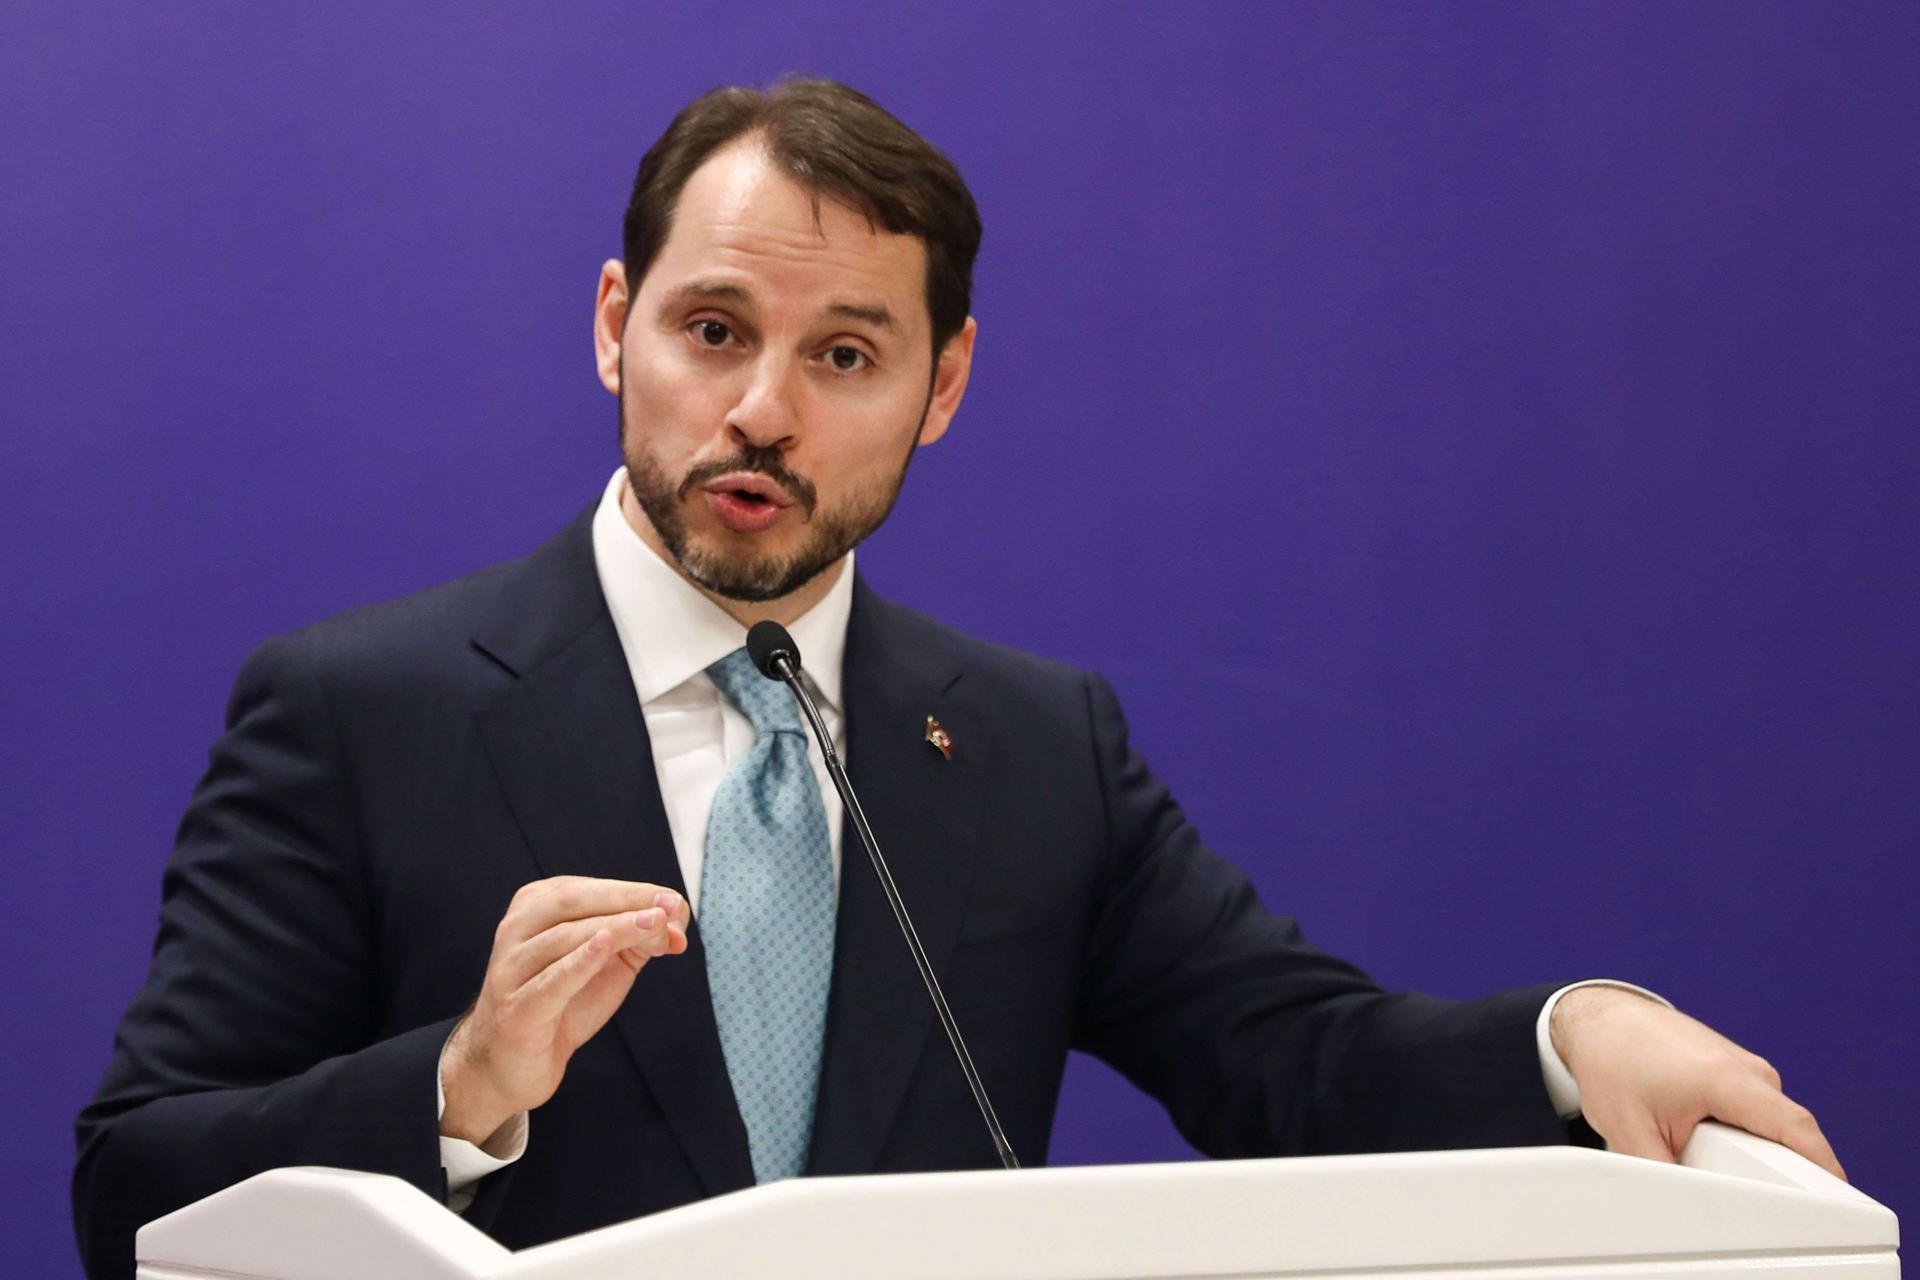 Turkey's minister of Treasury and Finance Berat Albayrak gestures as he speaks during a joint press conference with Turkey's Foreign Minister, Justice Minister and Interior Minister after attending the meeting of 5th Reform Action Group in Ankara, on December 11, 2018.